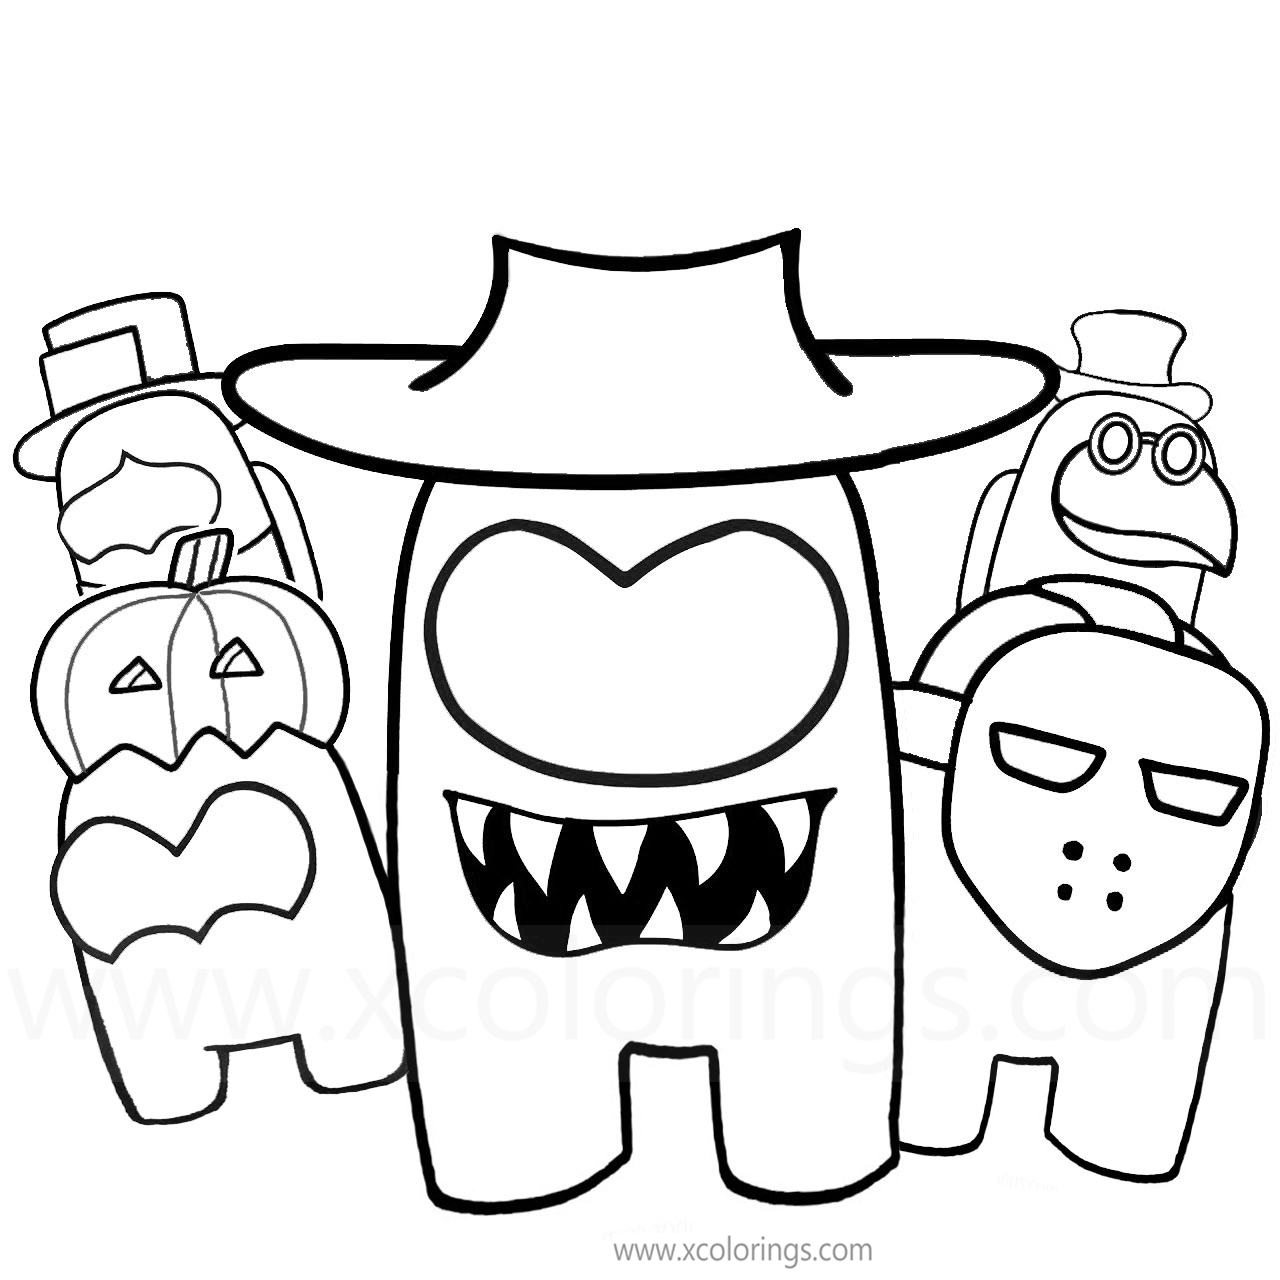 Among Us Coloring Pages Impostor Killing Crew with Light